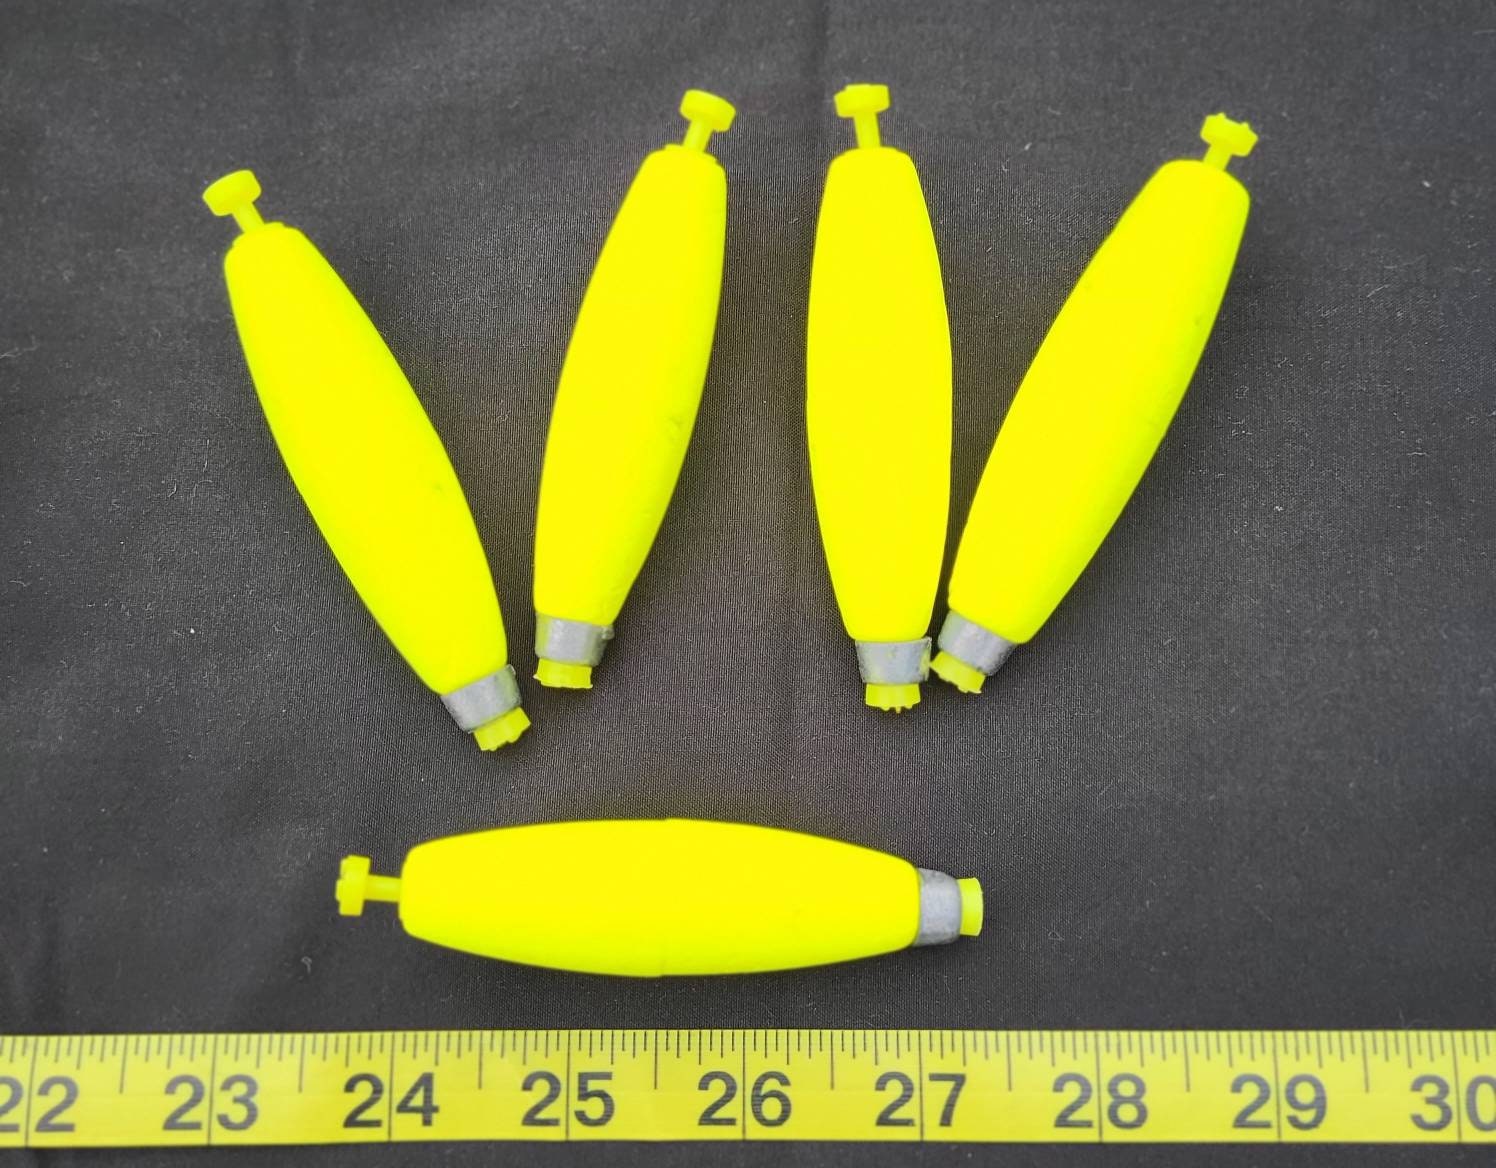 24 Weighted, 3 Inch Length Snap-on Styrofoam Fishing Floats, Bright Yellow  Color Large Float, Wholesale -  Canada